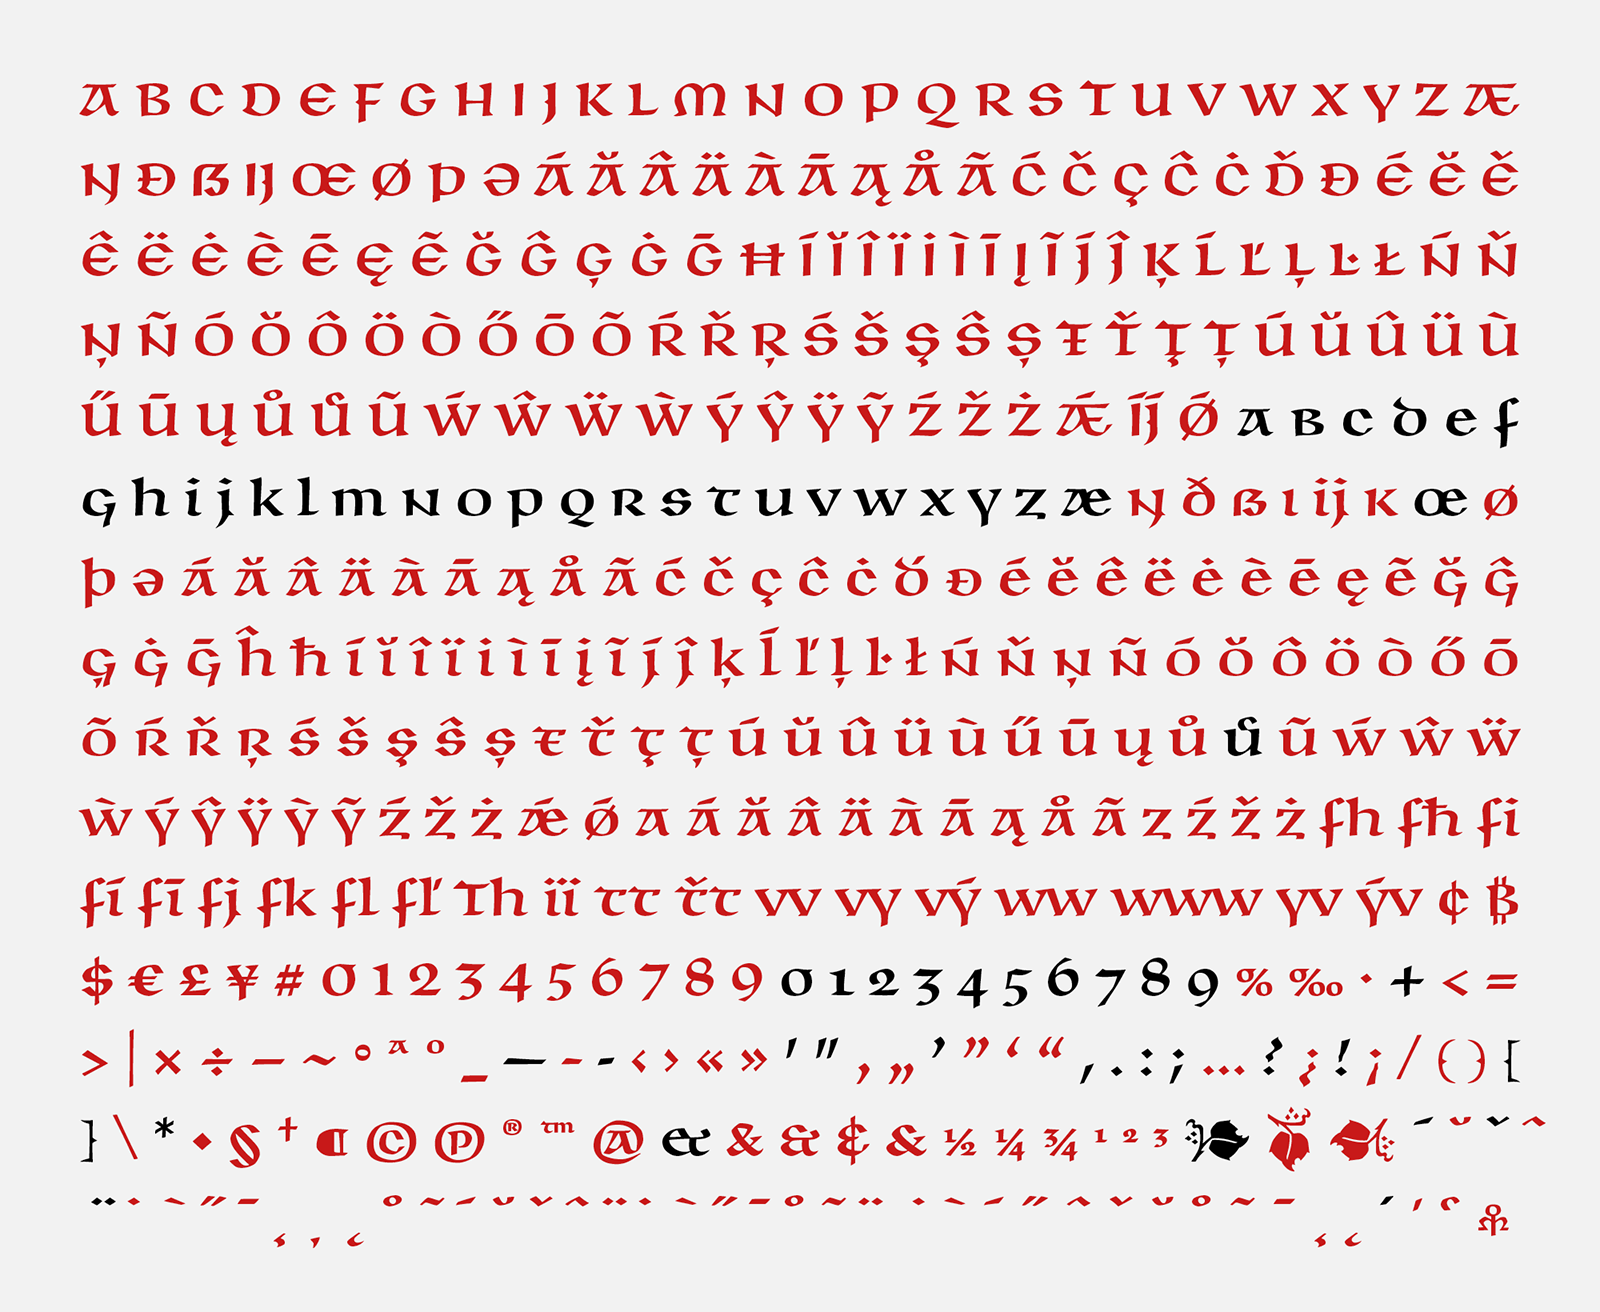 The complete character set of the BC Unciála typeface. The ones marked in black are the original characters designed by Oldřich Menhart. The red characters are the ones that have been newly created.